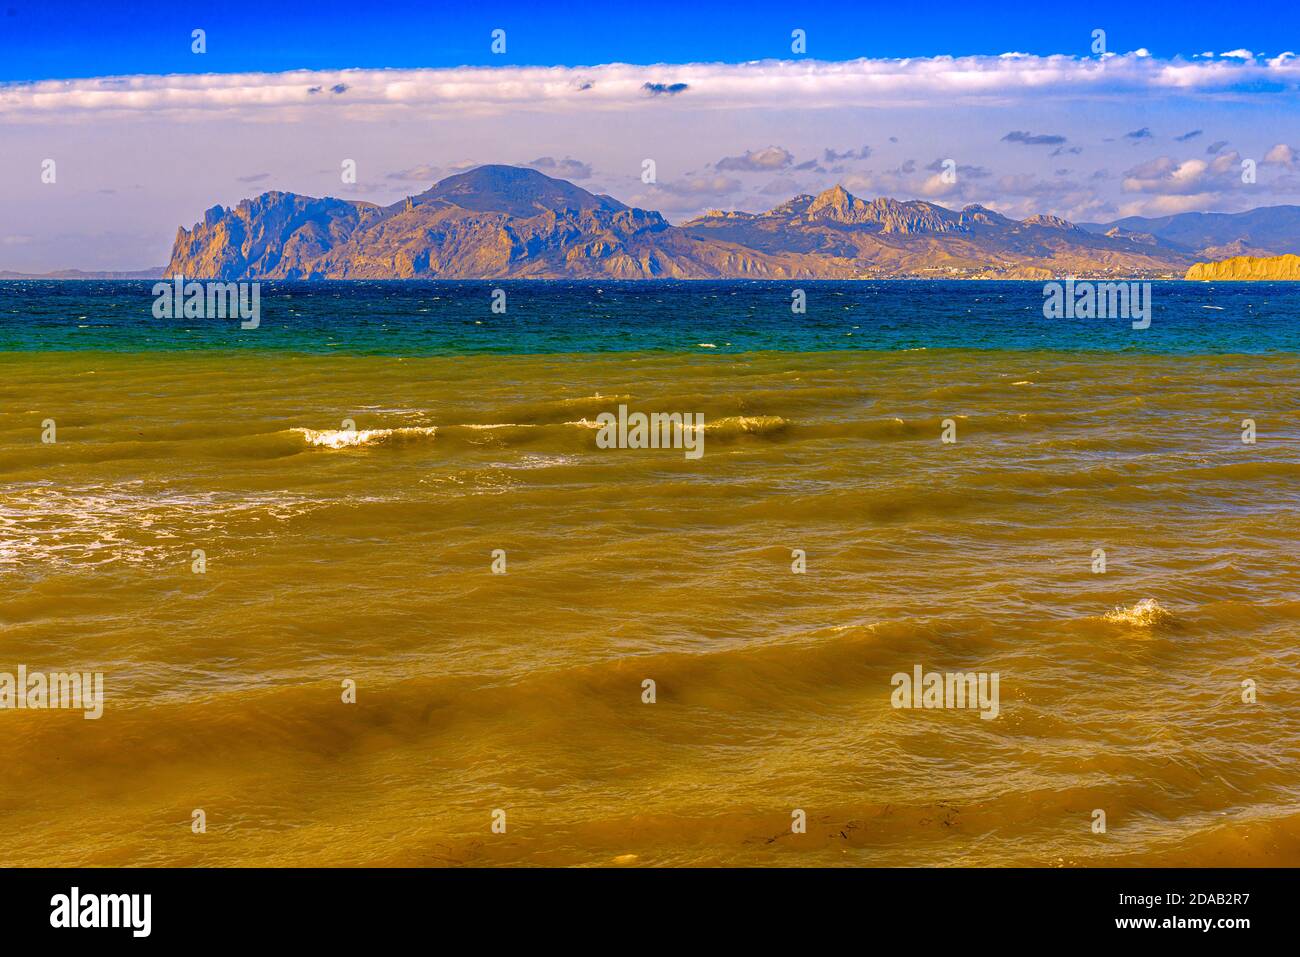 Resort place on The black sea coast in the Crimea Ordzhonikidze, the sea is stormy, so the water near the shore, where it is shallow, mixed with sand Stock Photo